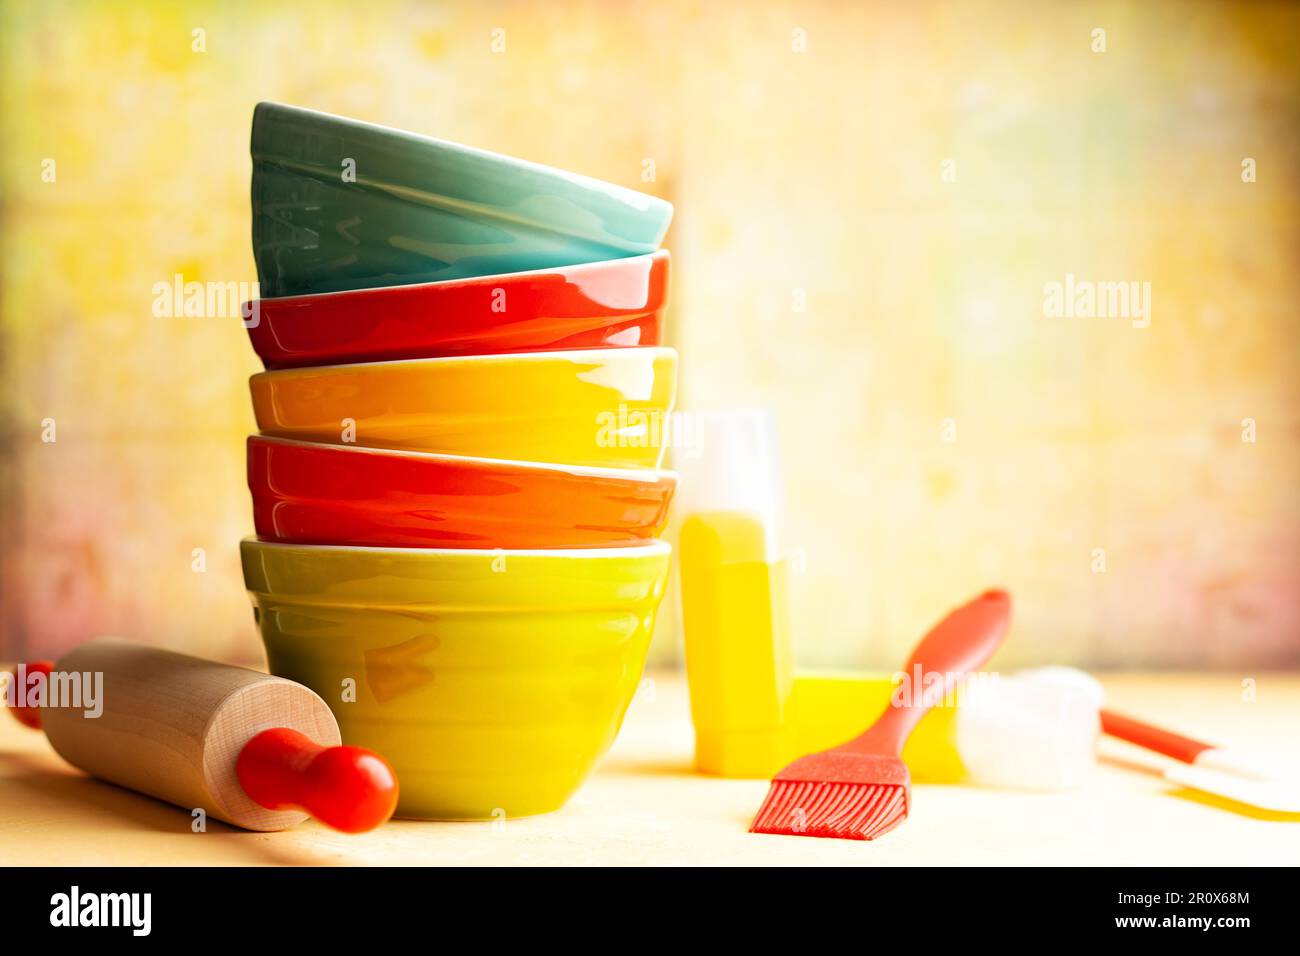 https://c8.alamy.com/comp/2R0X68M/kitchen-cooking-utensils-background-with-ceramic-multi-colored-bowlsrolling-pin-spatula-on-yellow-background-concept-of-home-kitchen-decor-front-2R0X68M.jpg